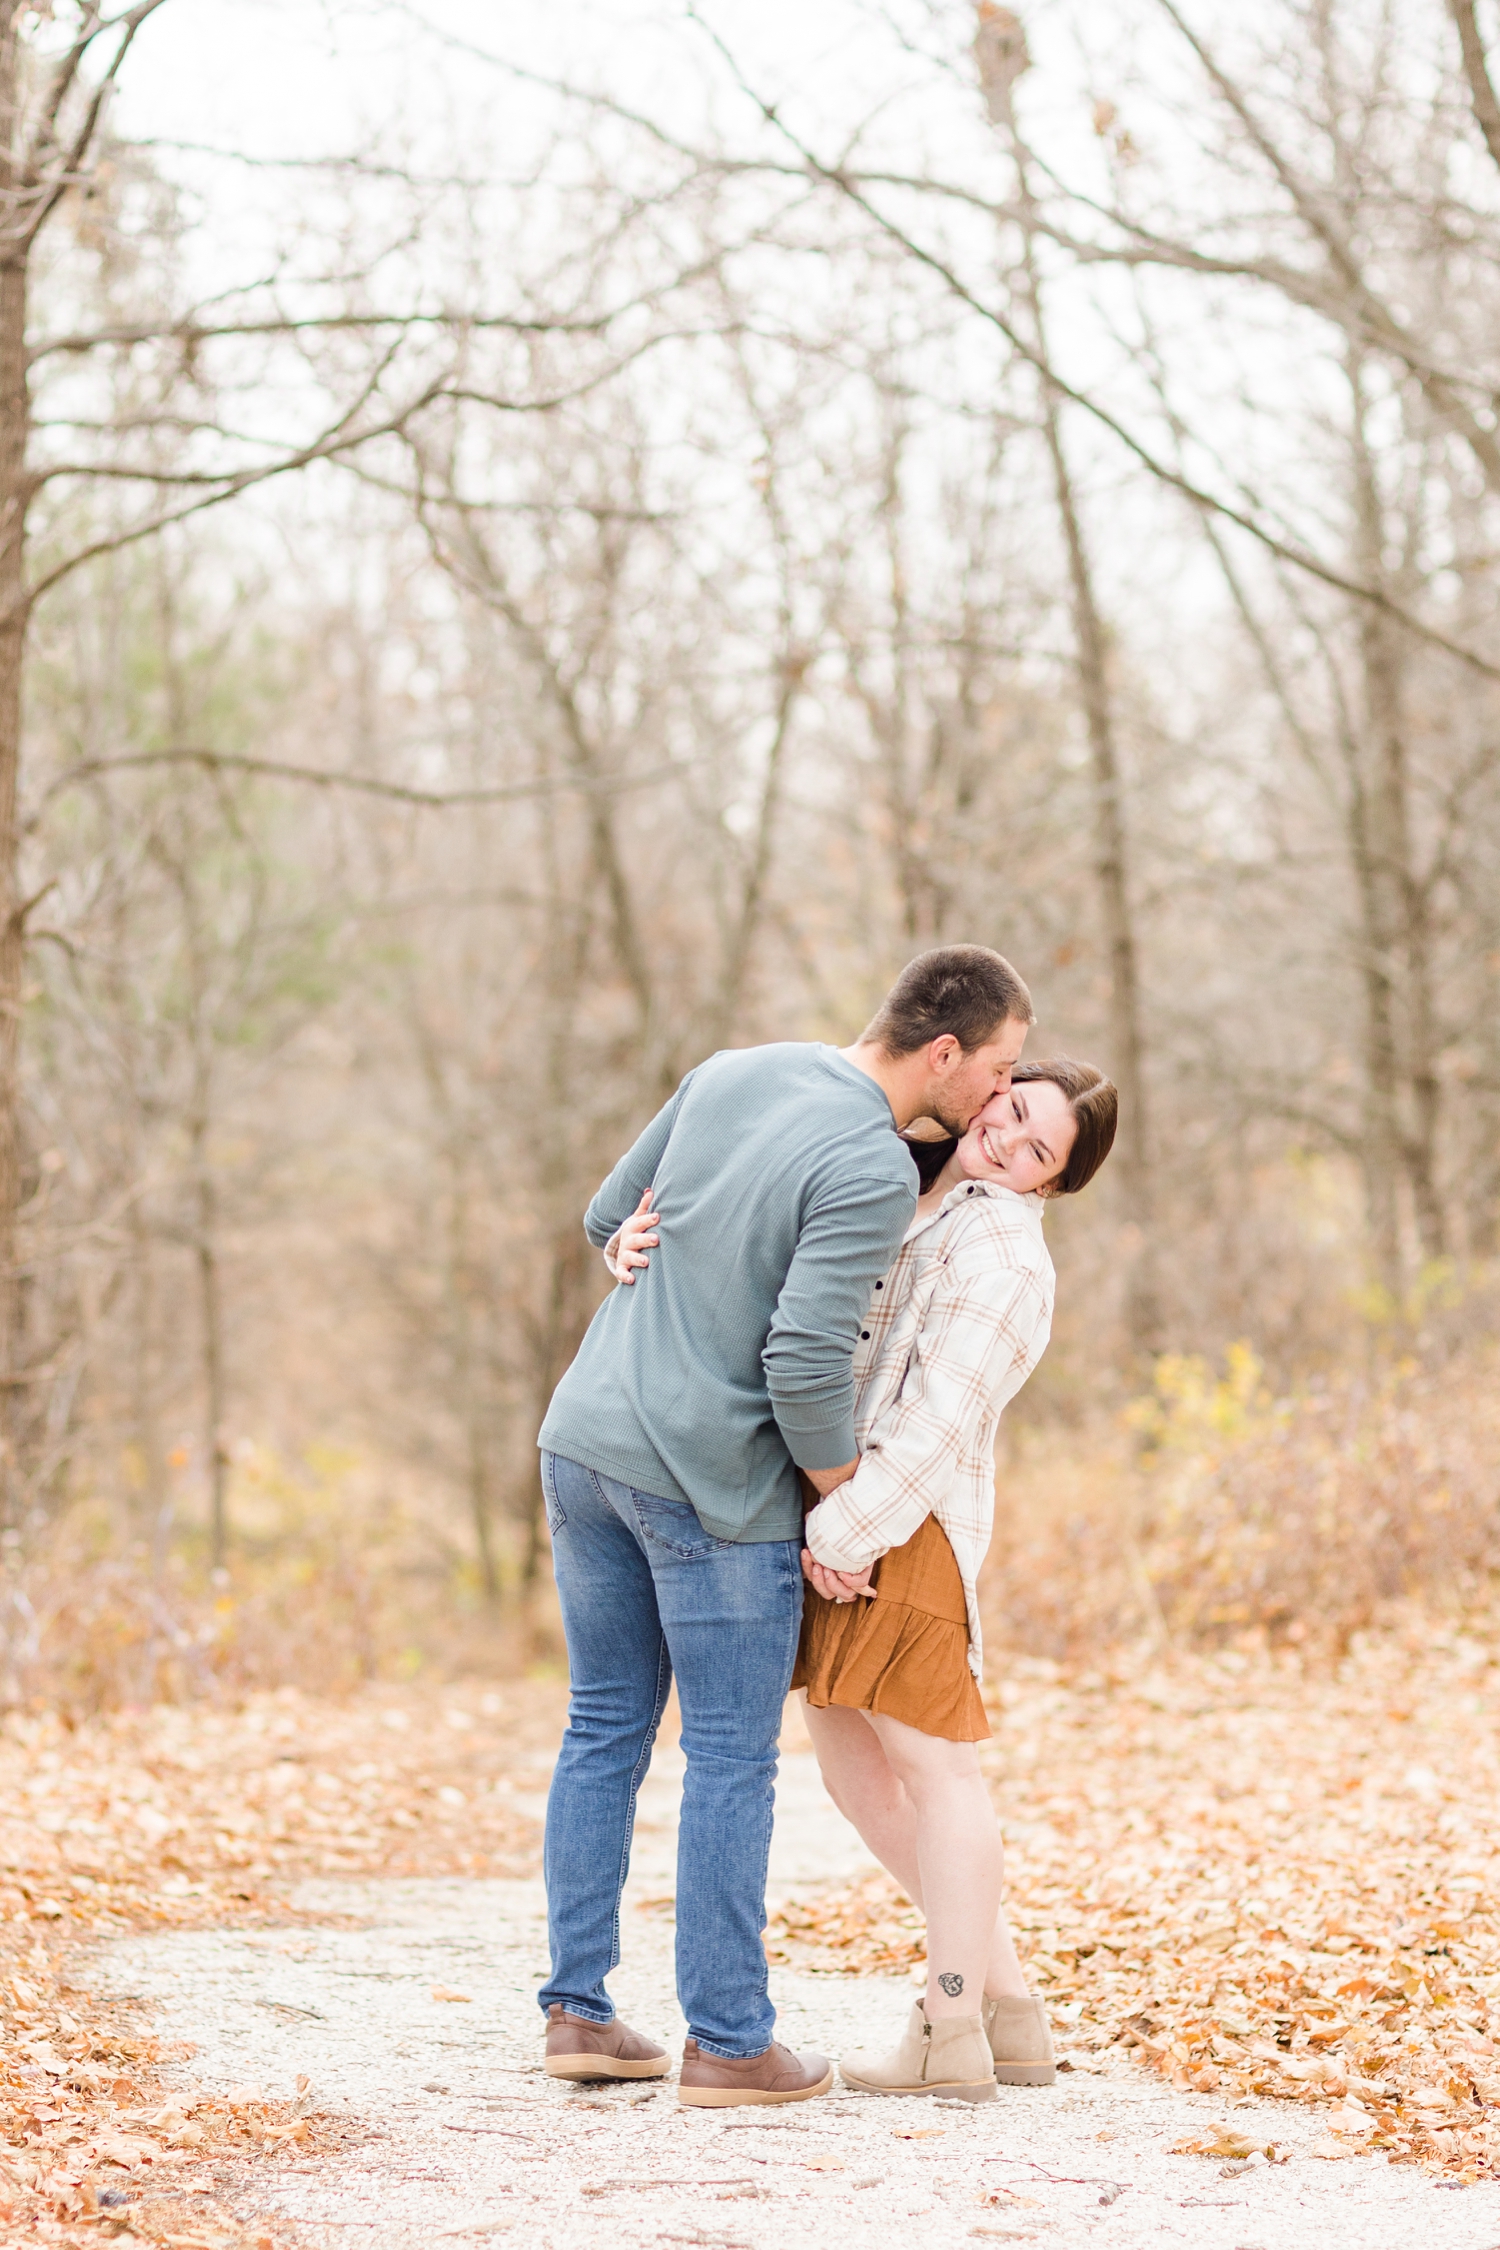 Austin leans in to kiss Mary's cheek during their engagement photography session at Kennedy Park in Fort Dodge, IA | CB Studio